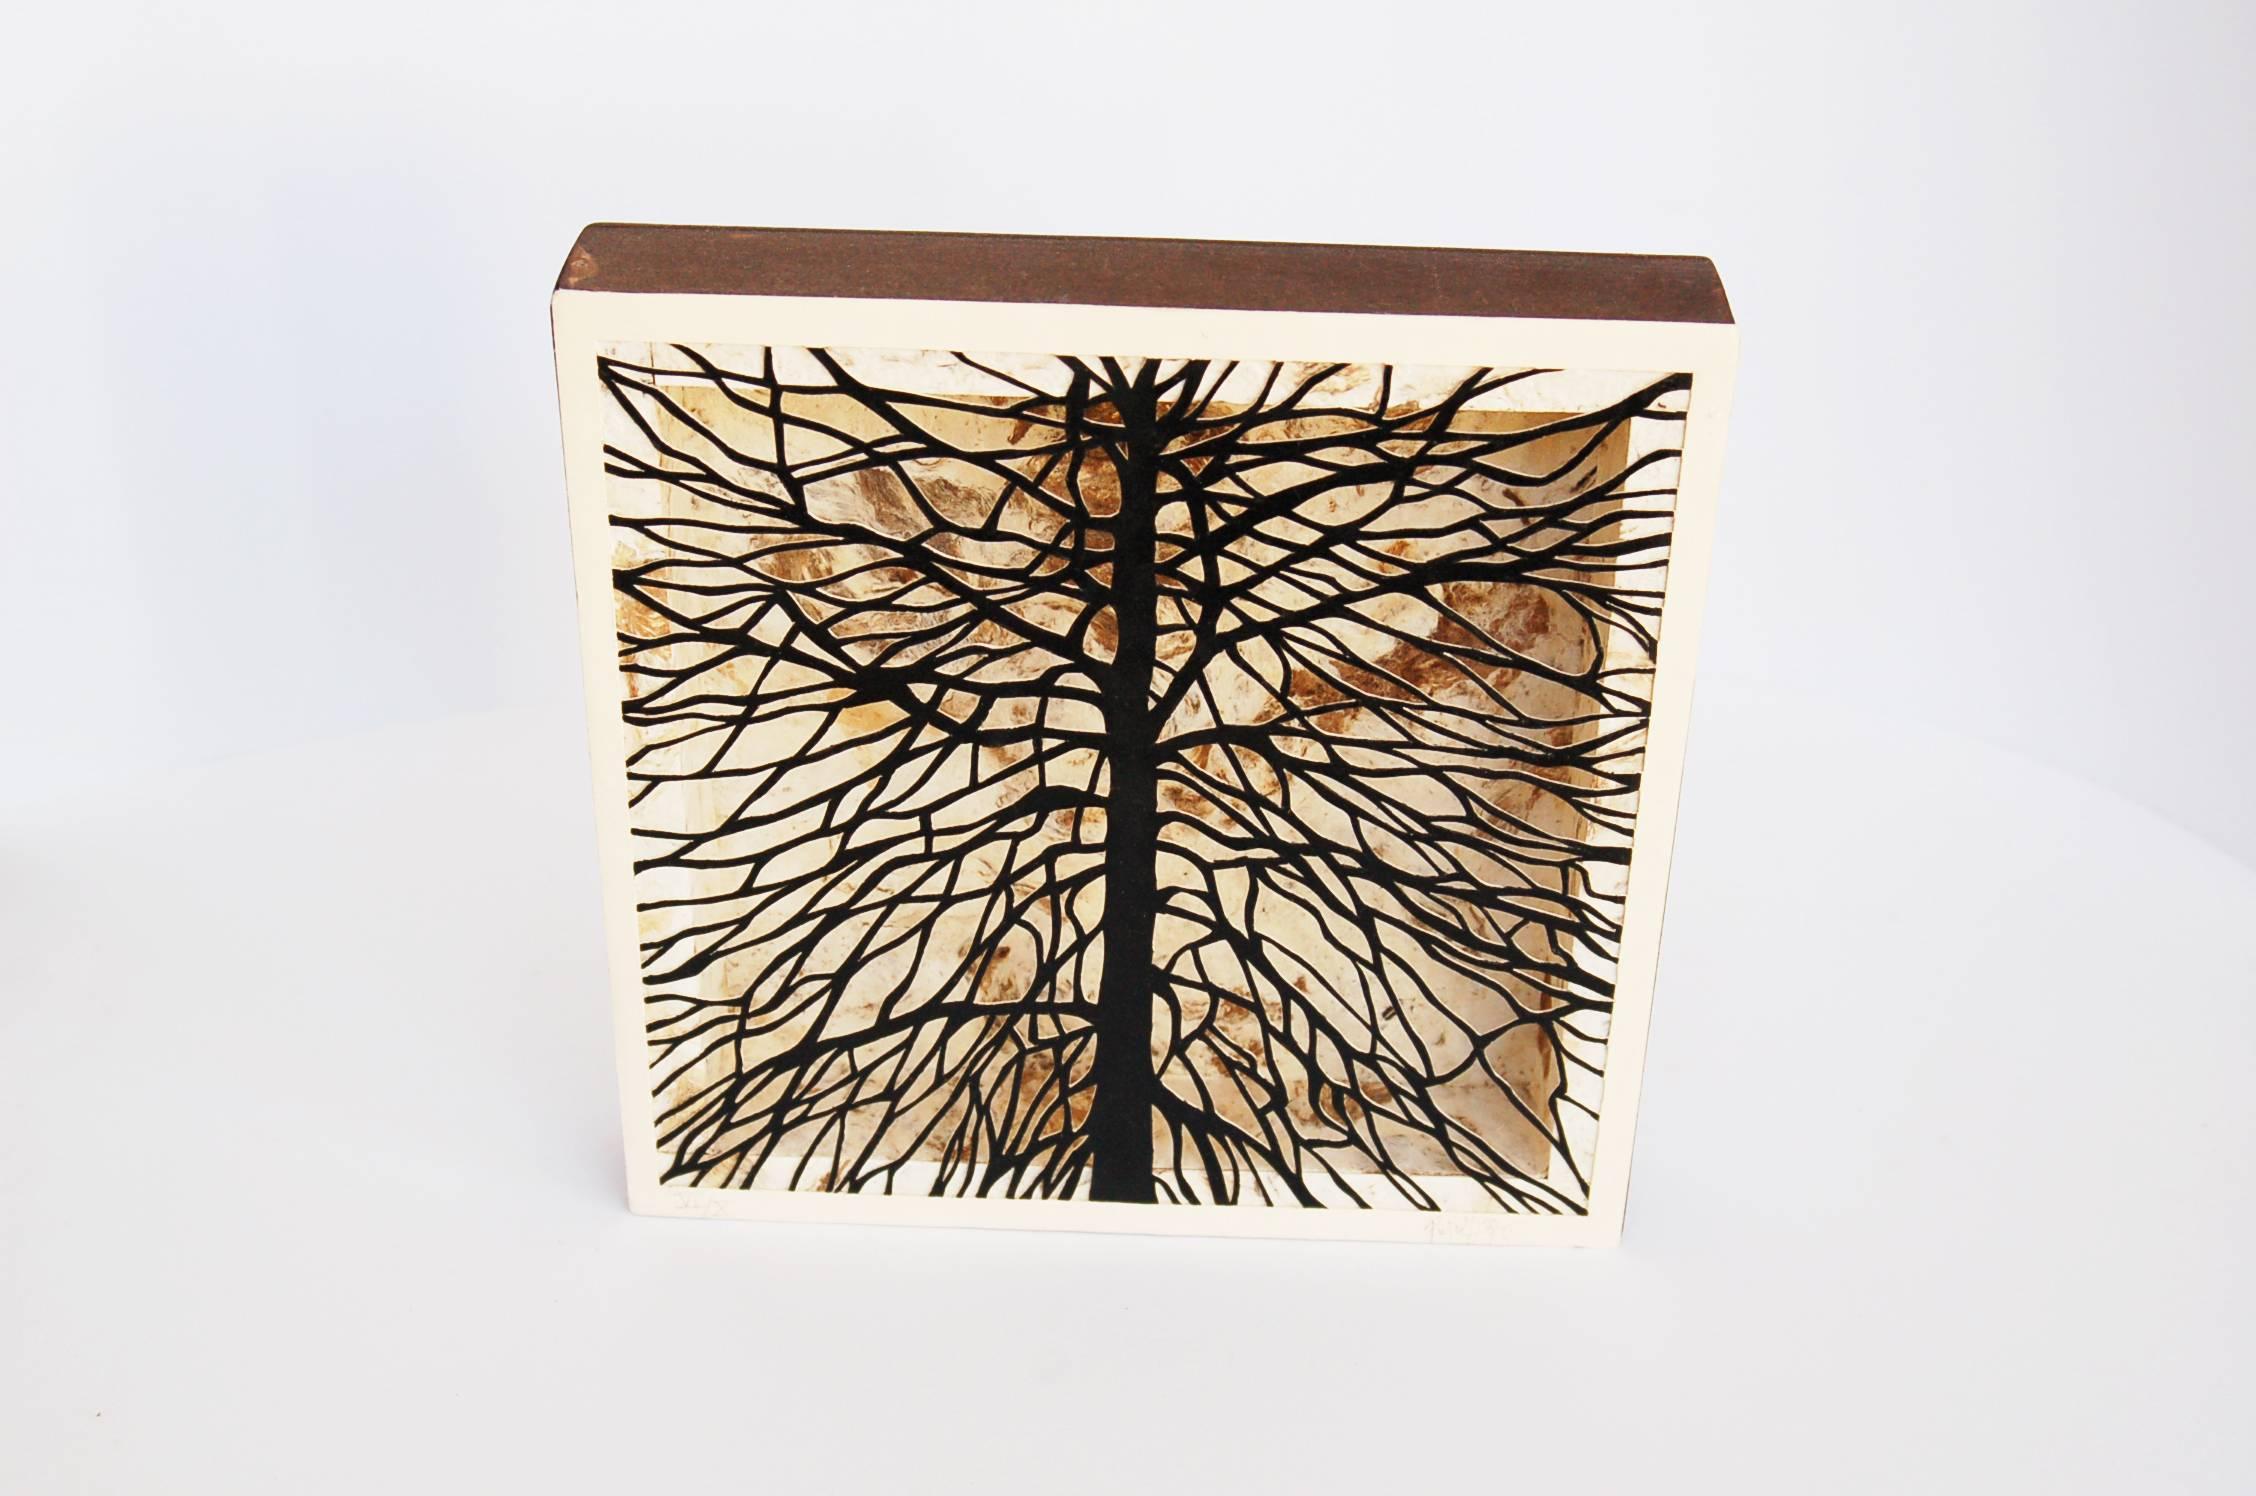 Maria Pujol's 3D engravings are beautifully delicate. She makes a print depicting branches in black ink on white paper. Then she cuts out the white paper, that is to say the space between the branches, with a scalpel. The 